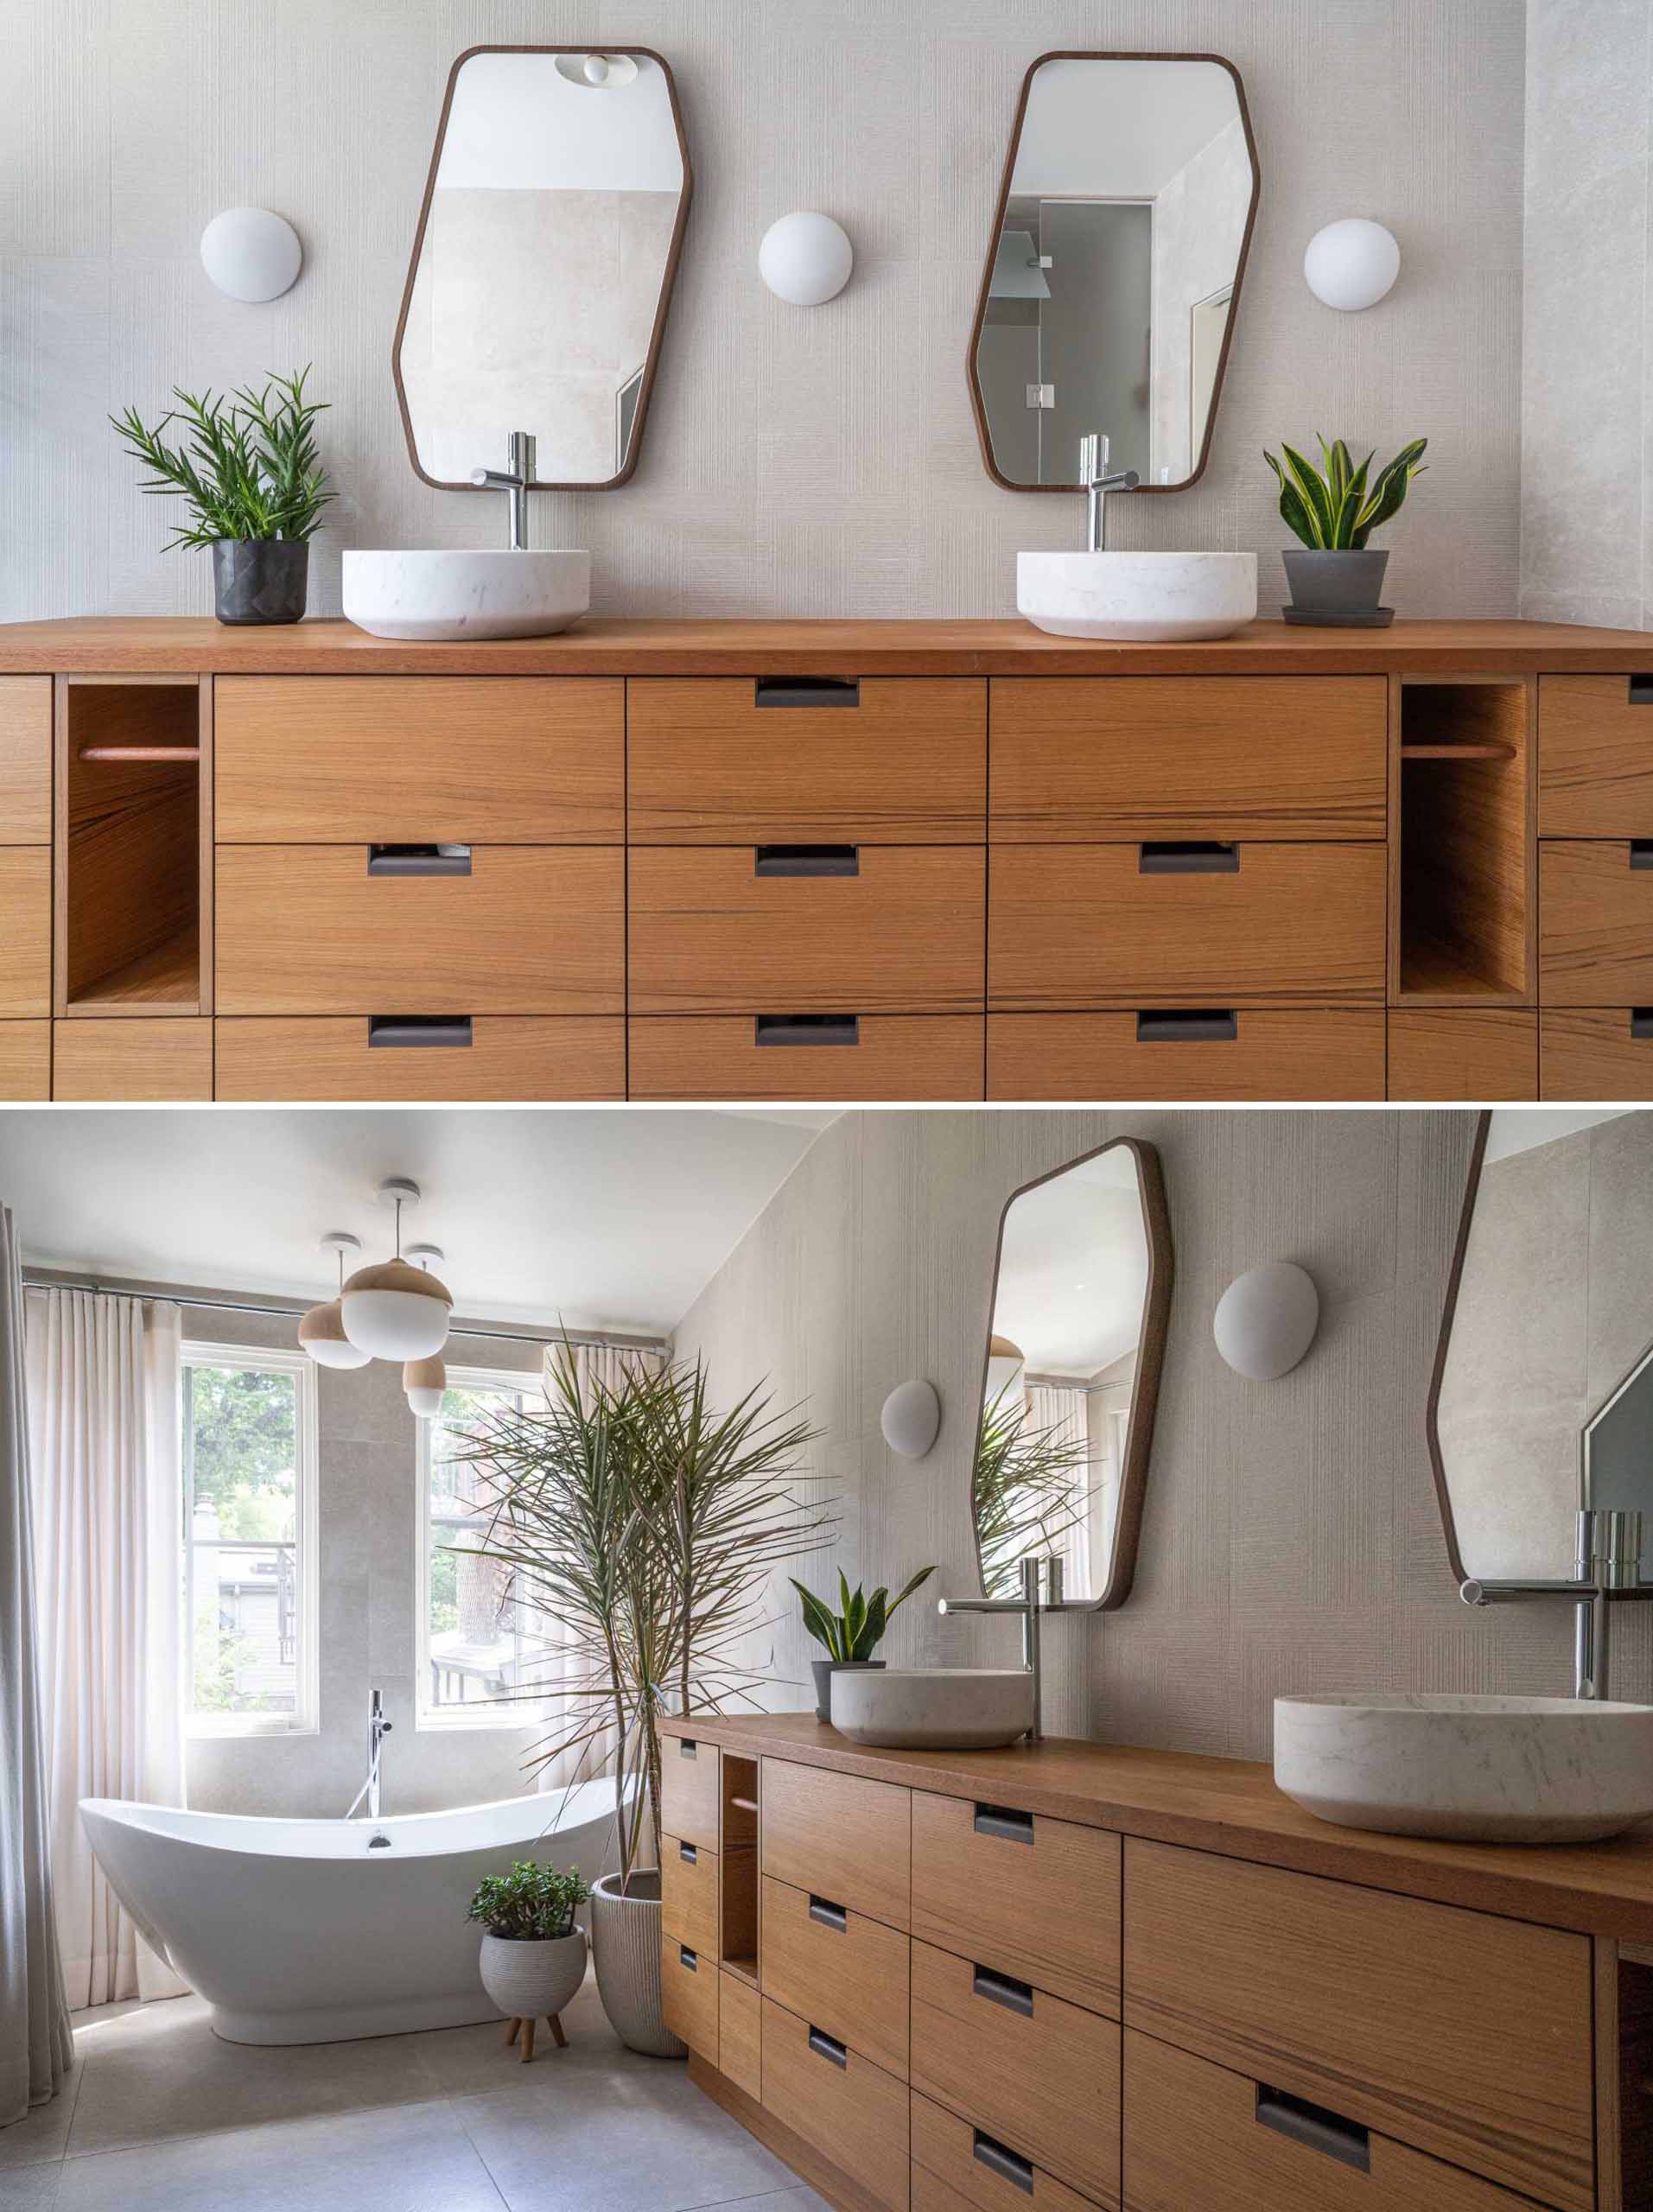 In this modern bathroom, a large wood vanity provides plenty of storage, while the round sinks complement the white wall lights, and the mirrors add a touch of fun.